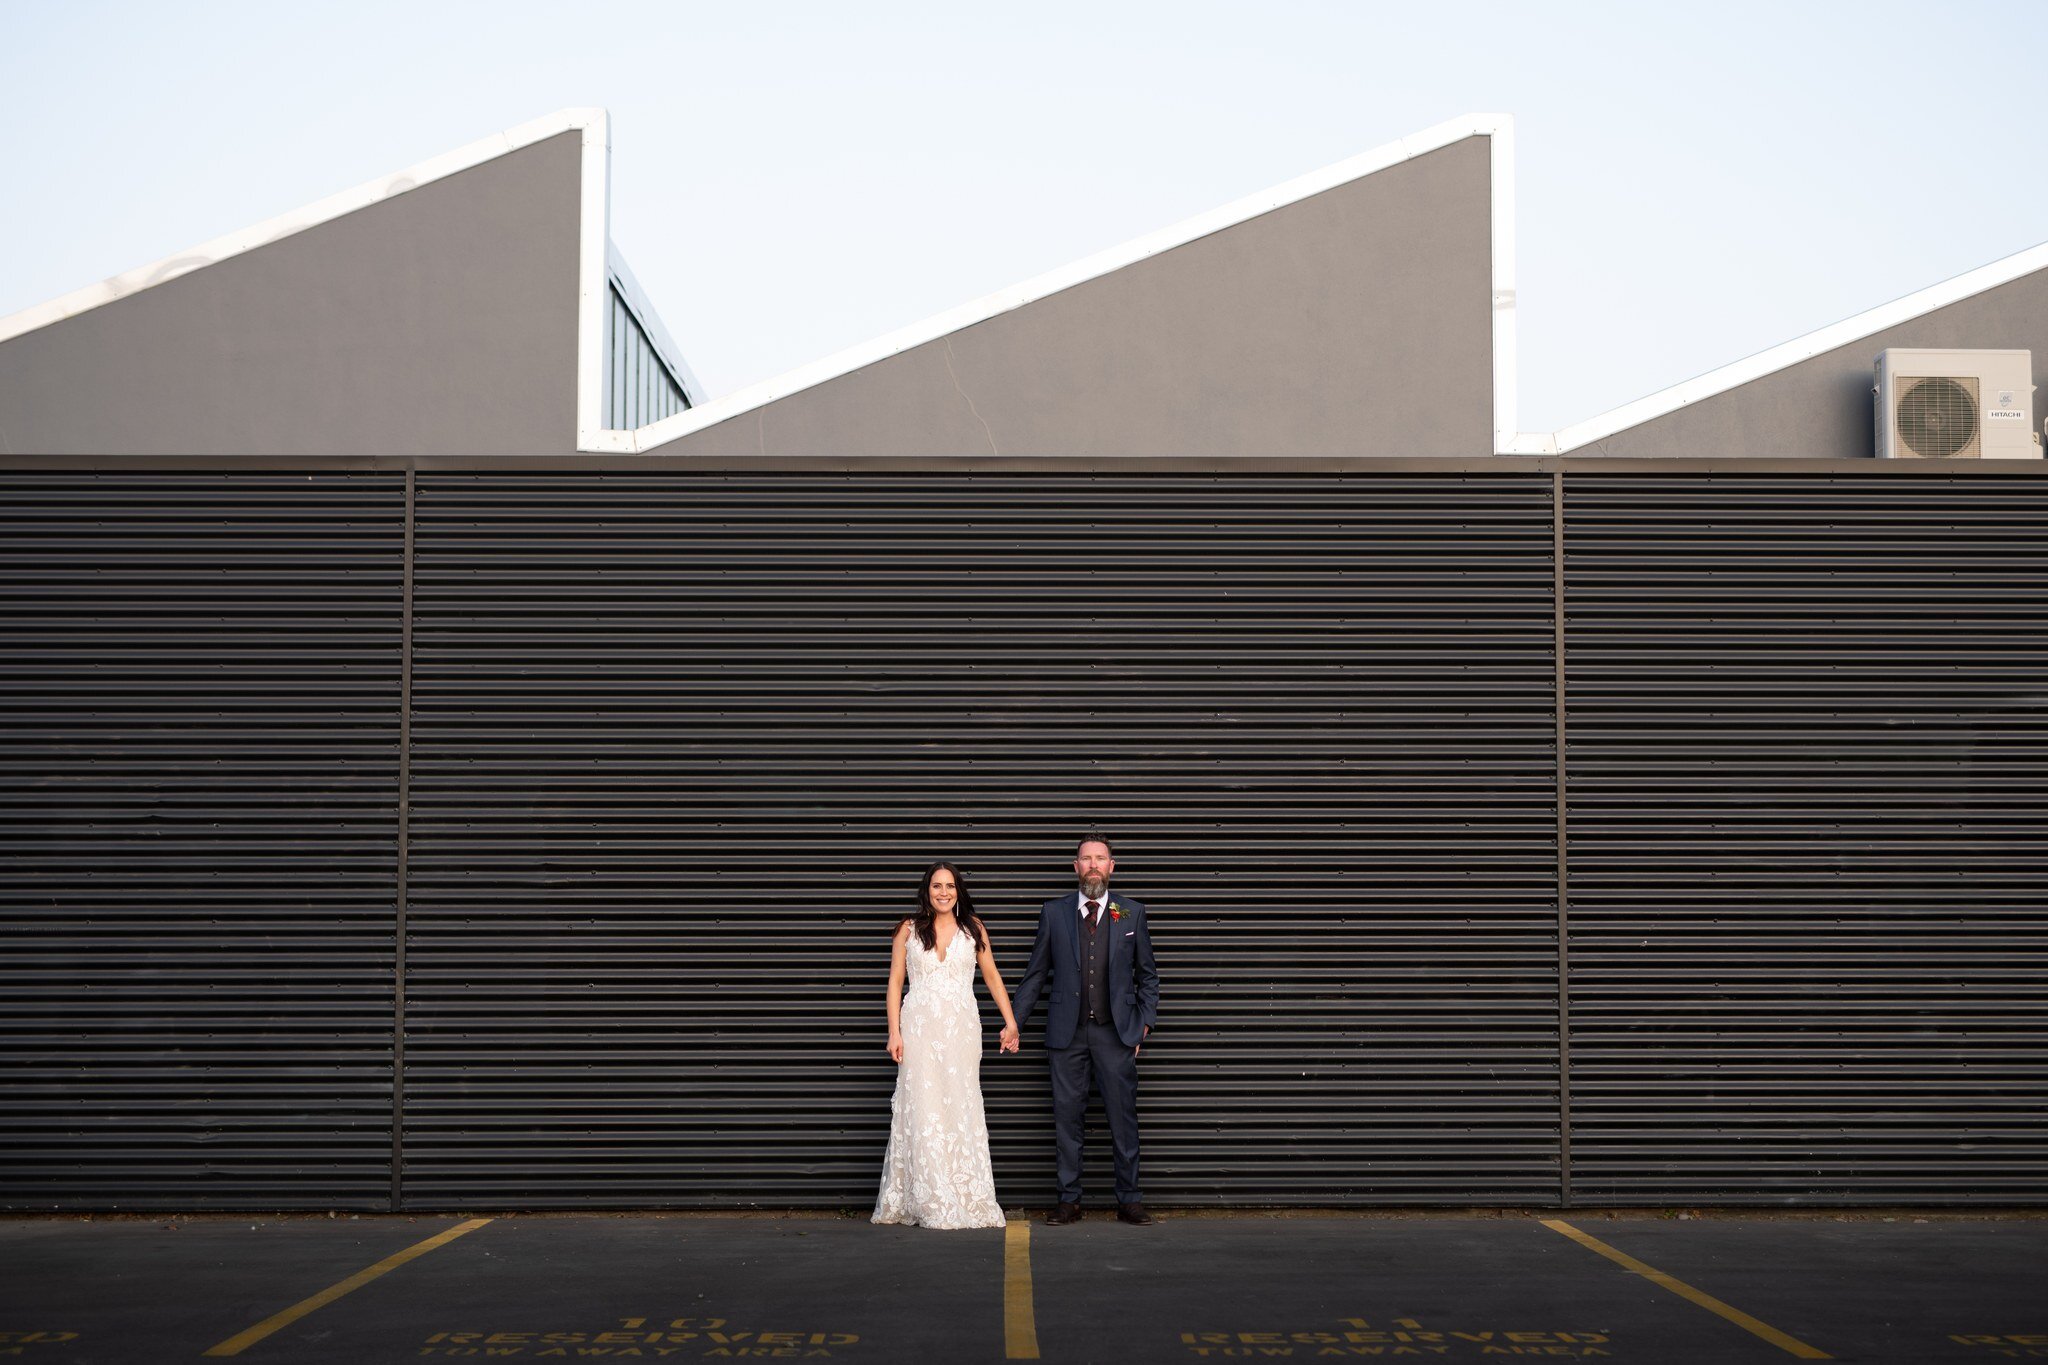 Nick and Angela celebrated their wedding with their best friends and two beautiful girls!  We had an absolute blast running around the city then enjoying a very epic reception at The Welder. What a day!
.
.
.
.
.
 #newzealandweddingsmagazine #newzeal